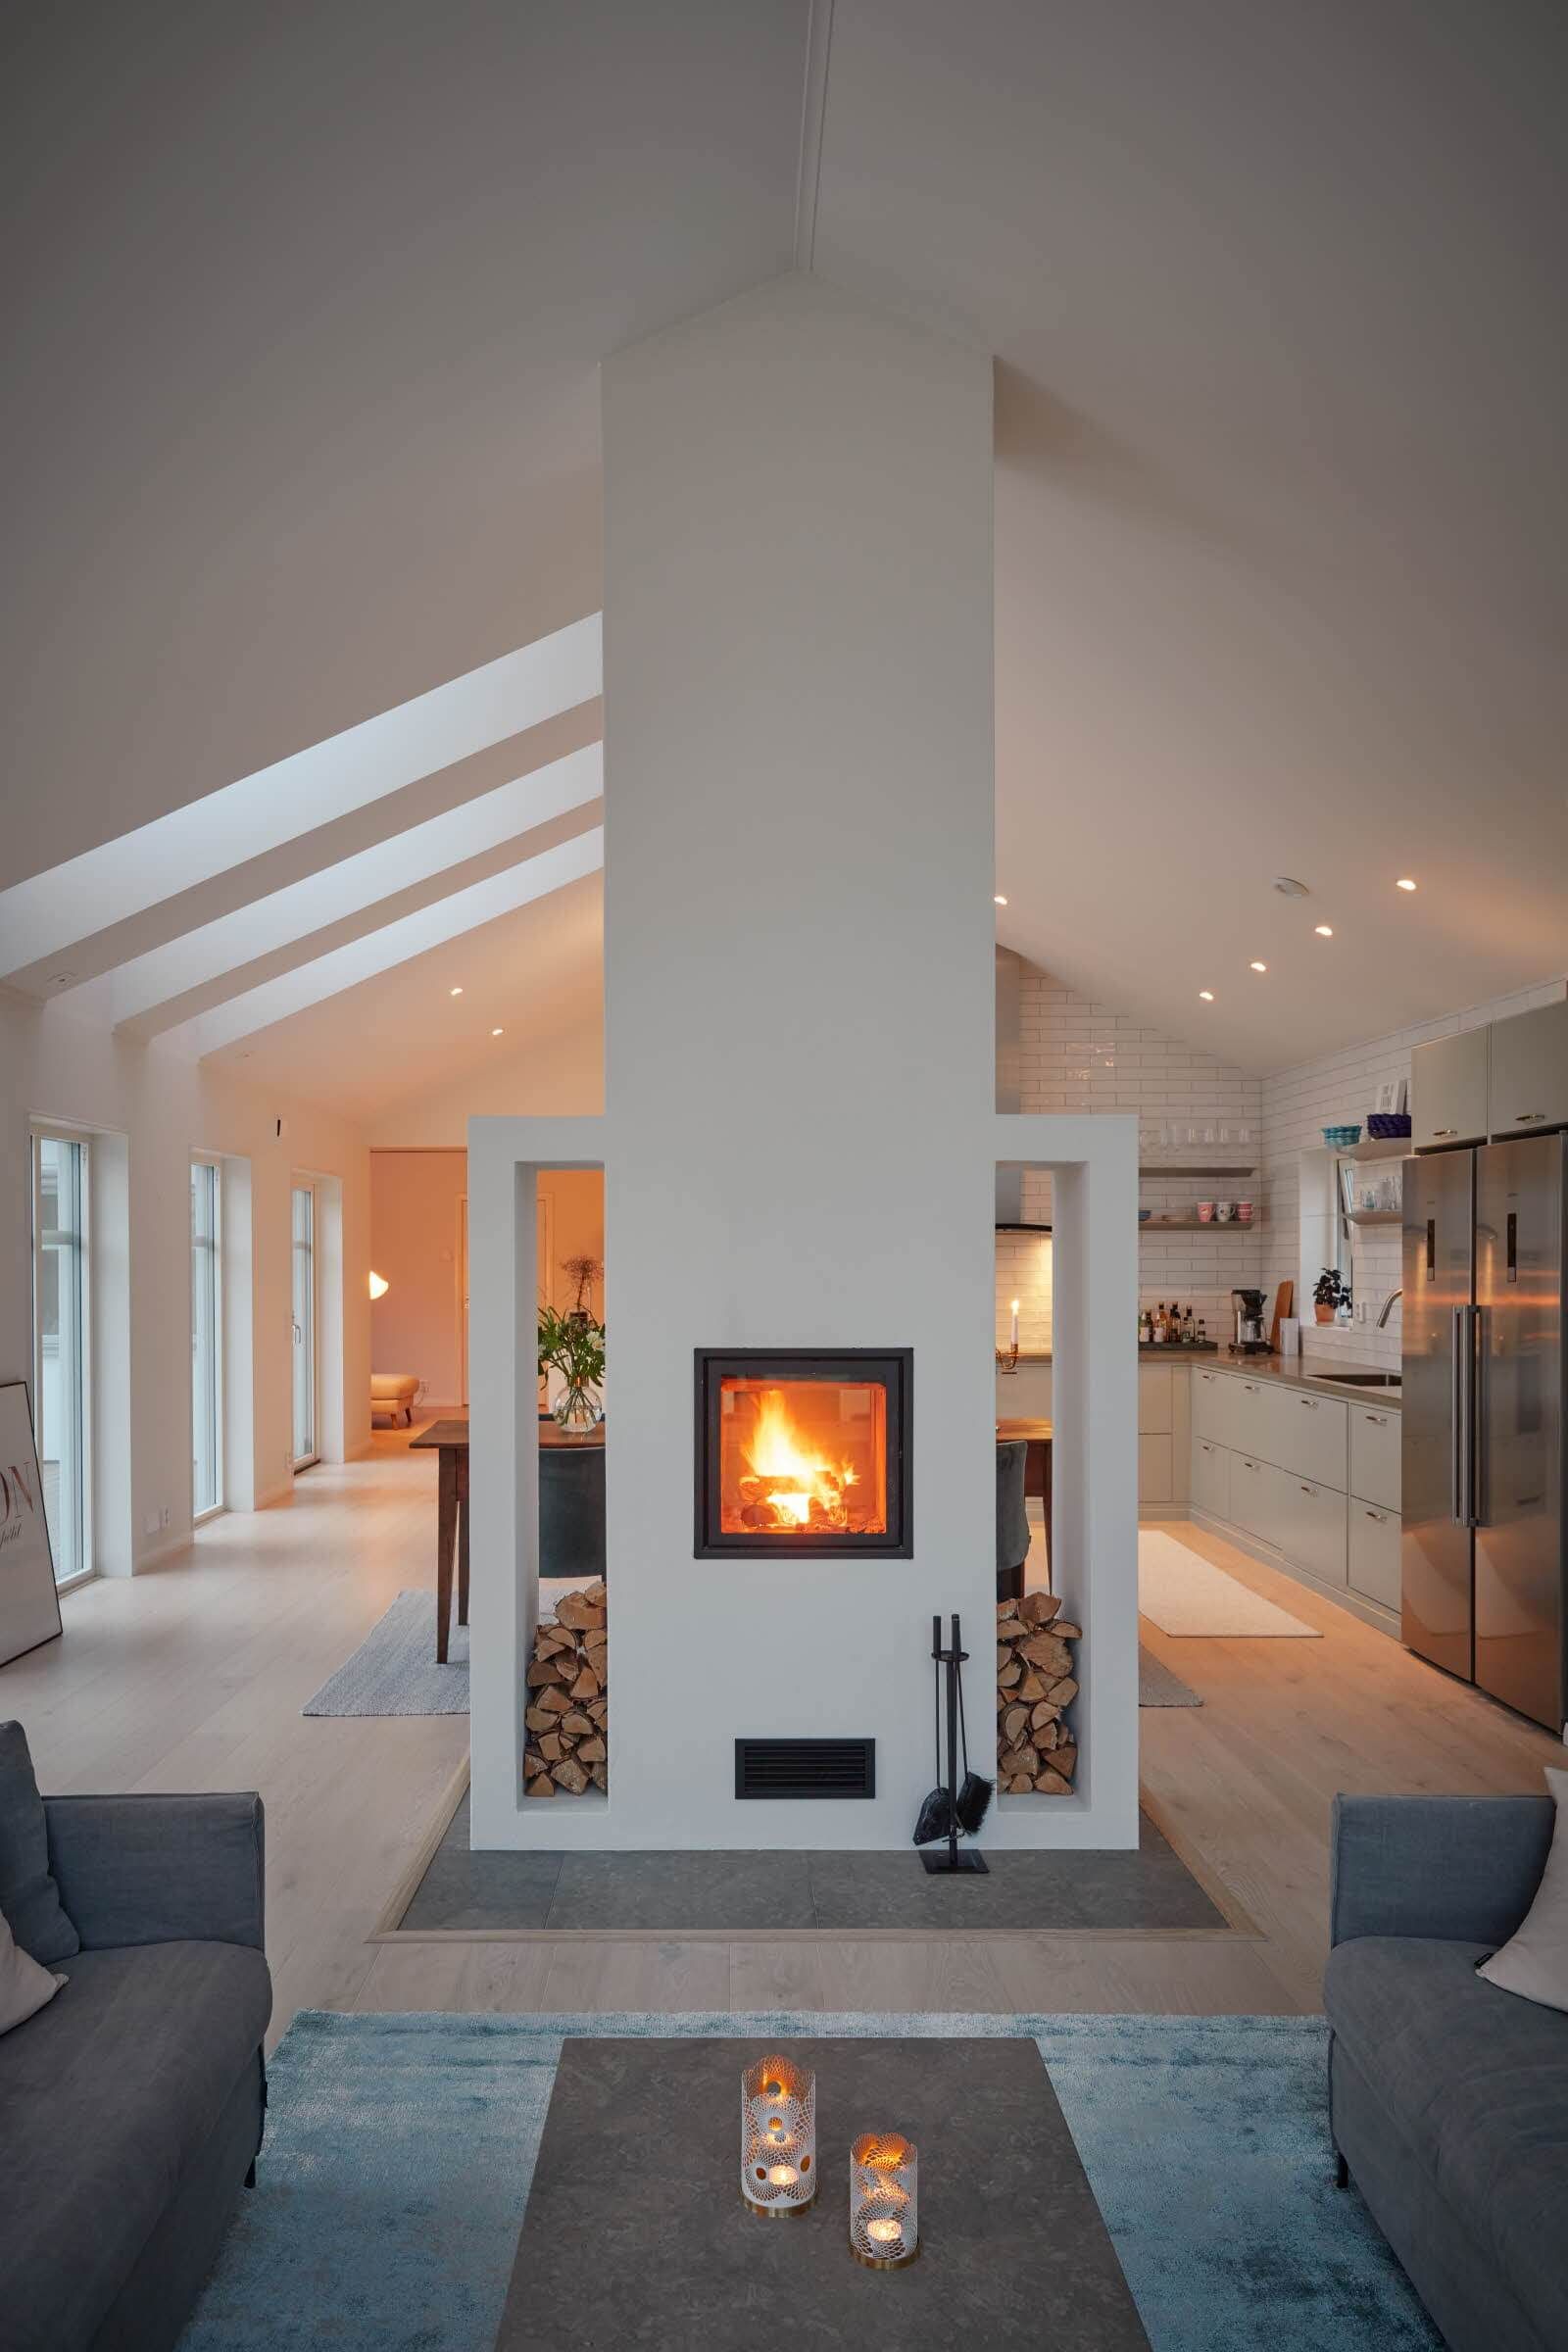 Fireplace Update Ideas Lovely 16 Gorgeous Double Sided Fireplace Design Ideas Take A Look